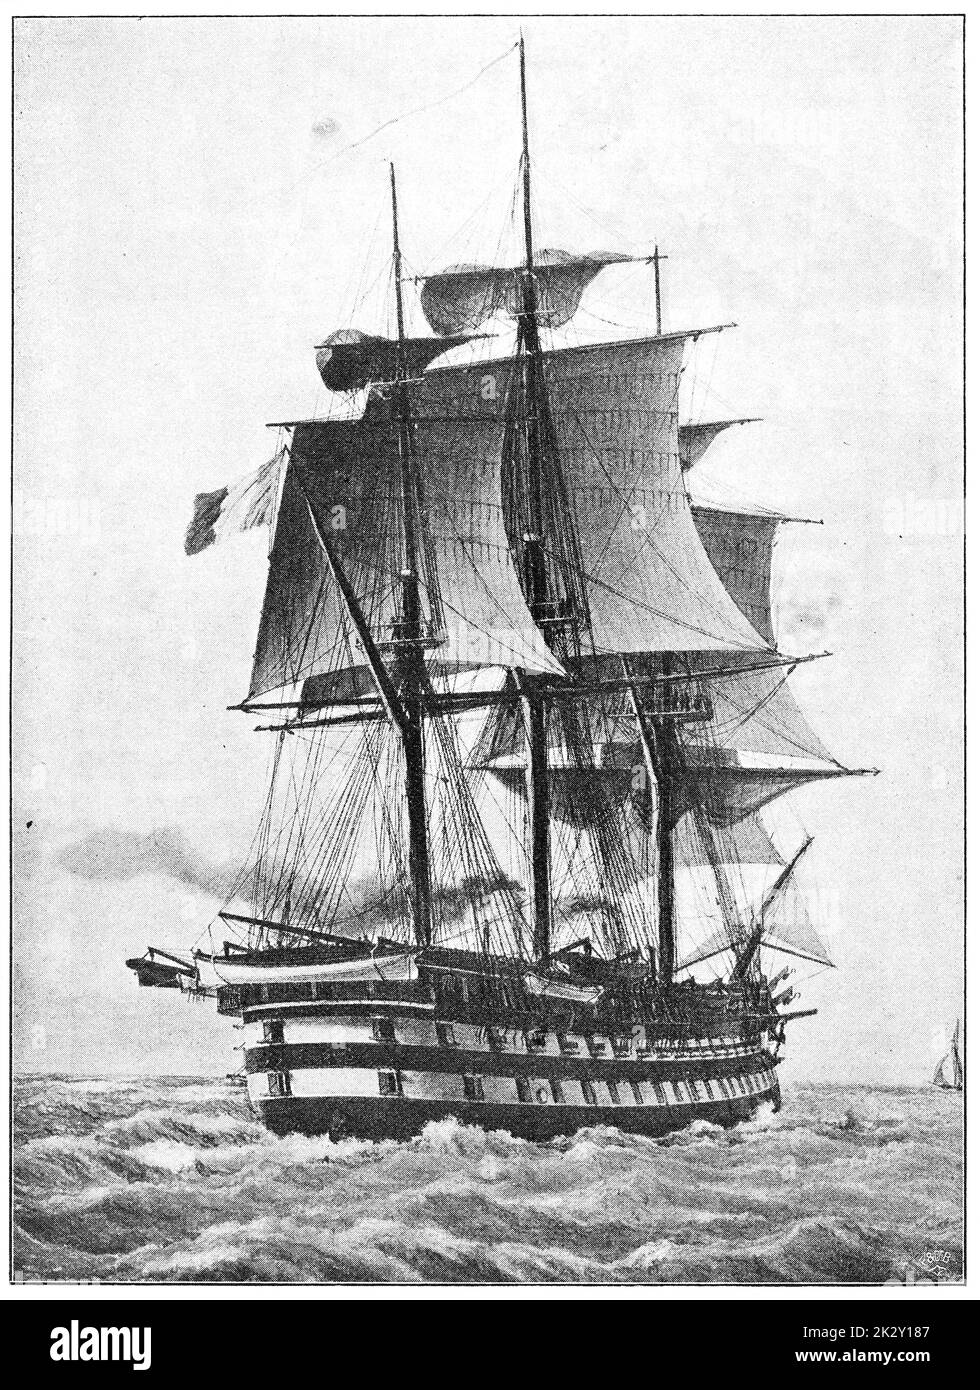 Napoleon (1850) - a 90-gun ship of the line of the French Navy, and the first purpose-built steam battleship in the world. Illustration of the 19th century. Germany. White background. Stock Photo